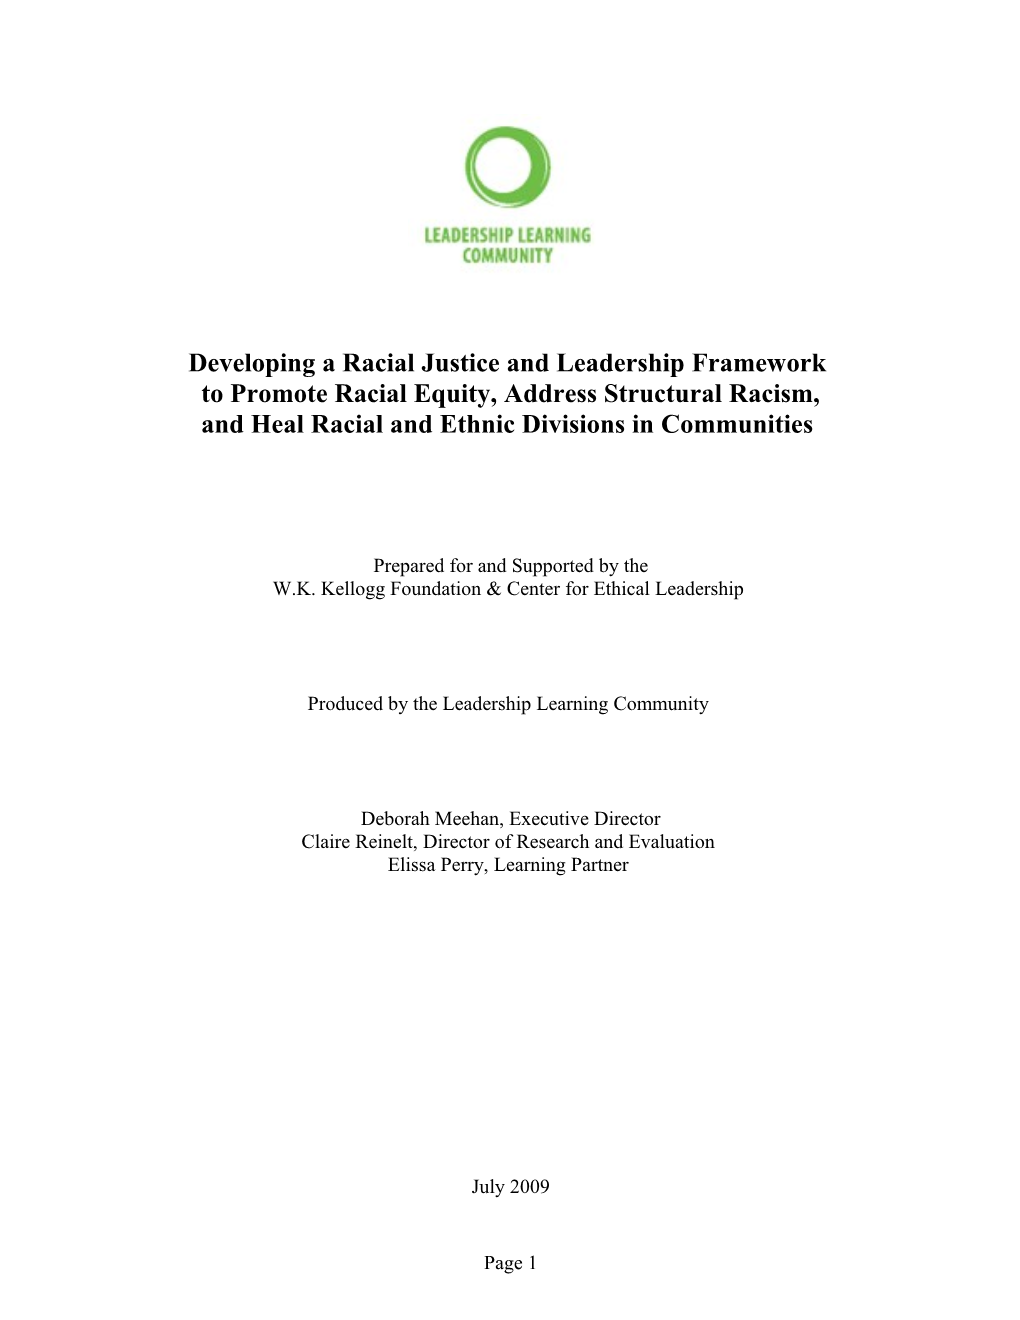 Developing a Racial Justice and Leadership Framework